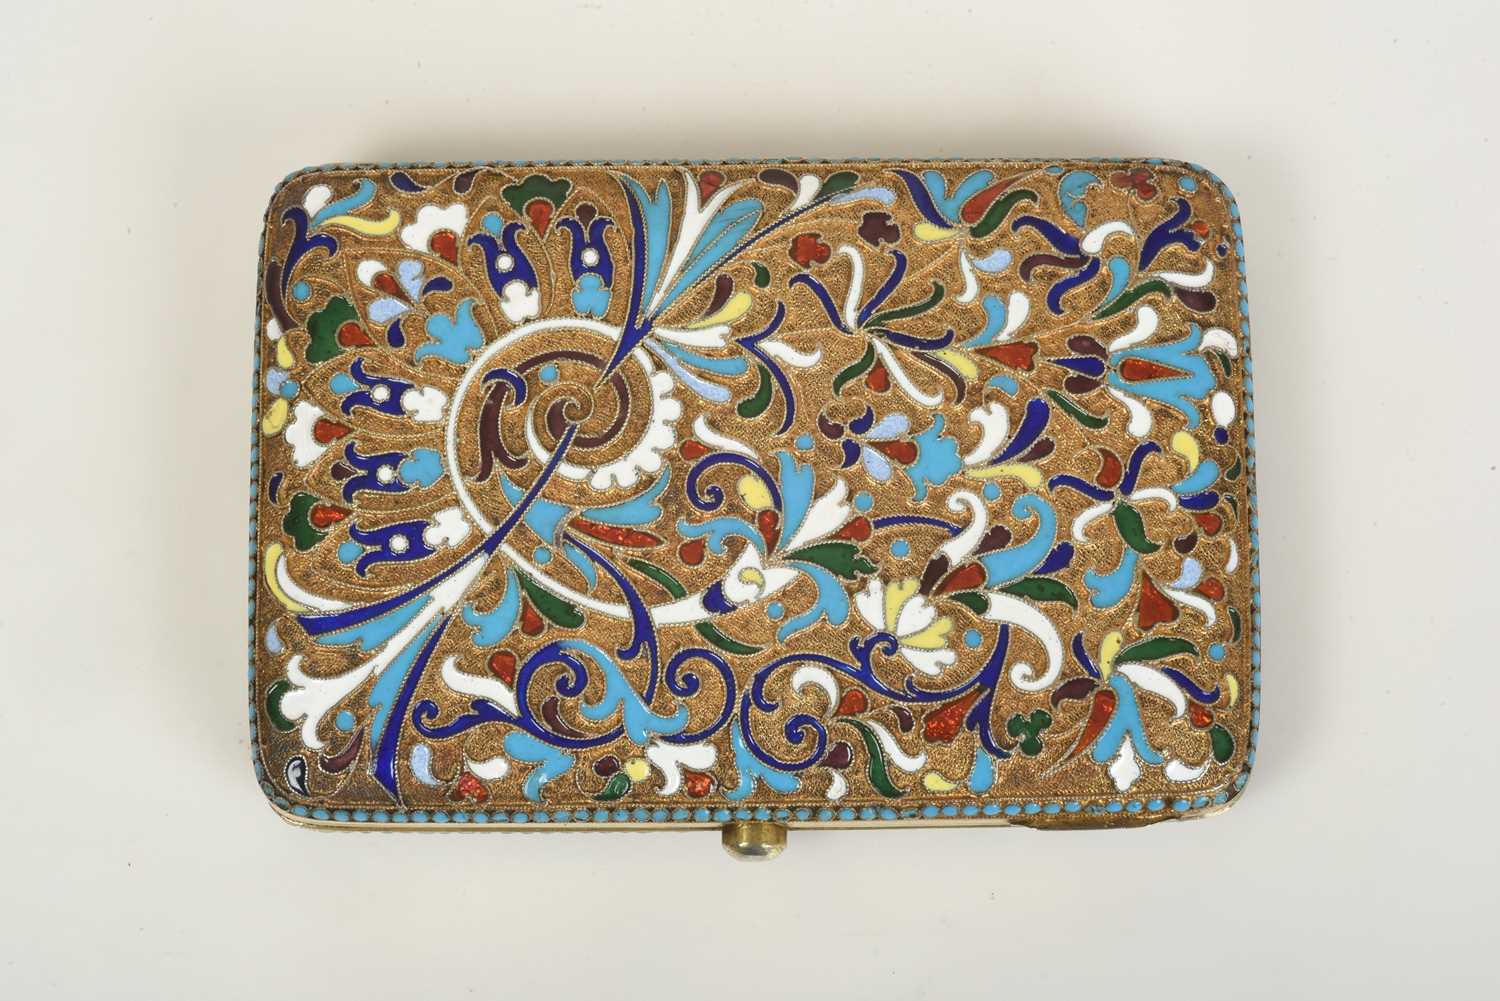 A Russian Silver-Gilt and Enamel Cigarette-Case, by Nicholai Zugeryev, Moscow, 1898-1914, Assay Mas - Image 2 of 6